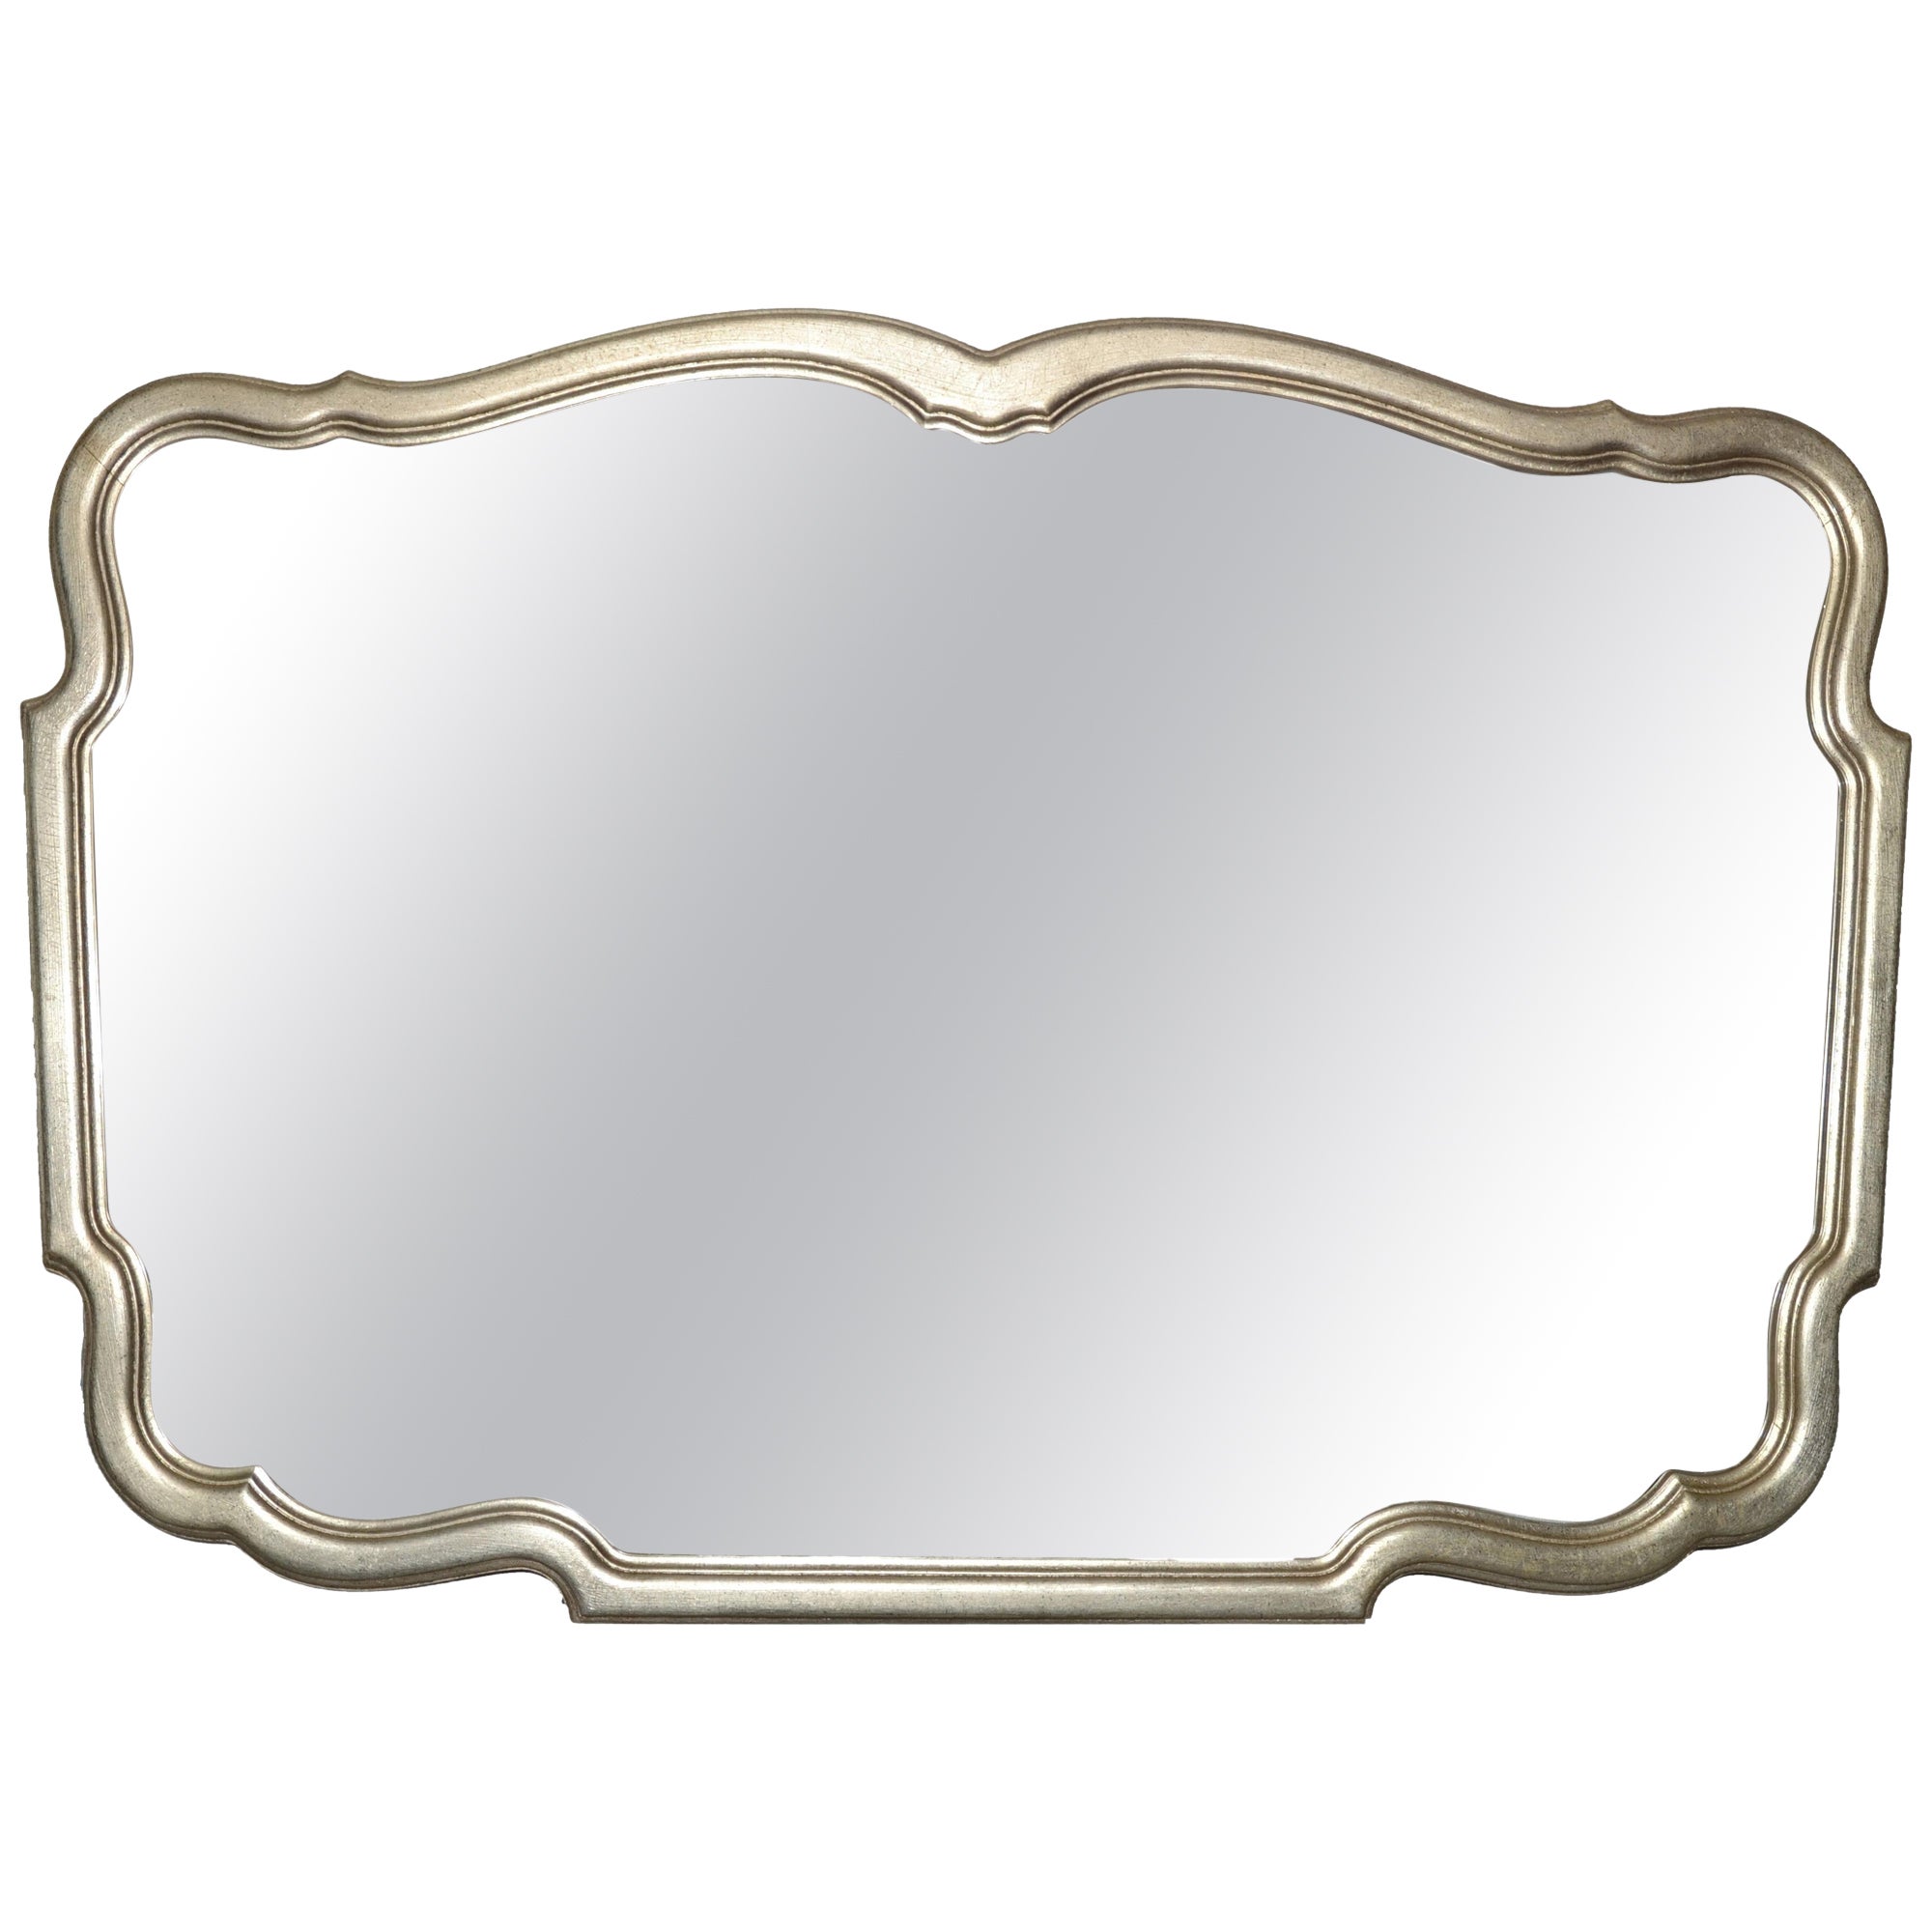 Large Vintage Curved French Provincial Silver Gold Finish Wall Mirror by Karges For Sale